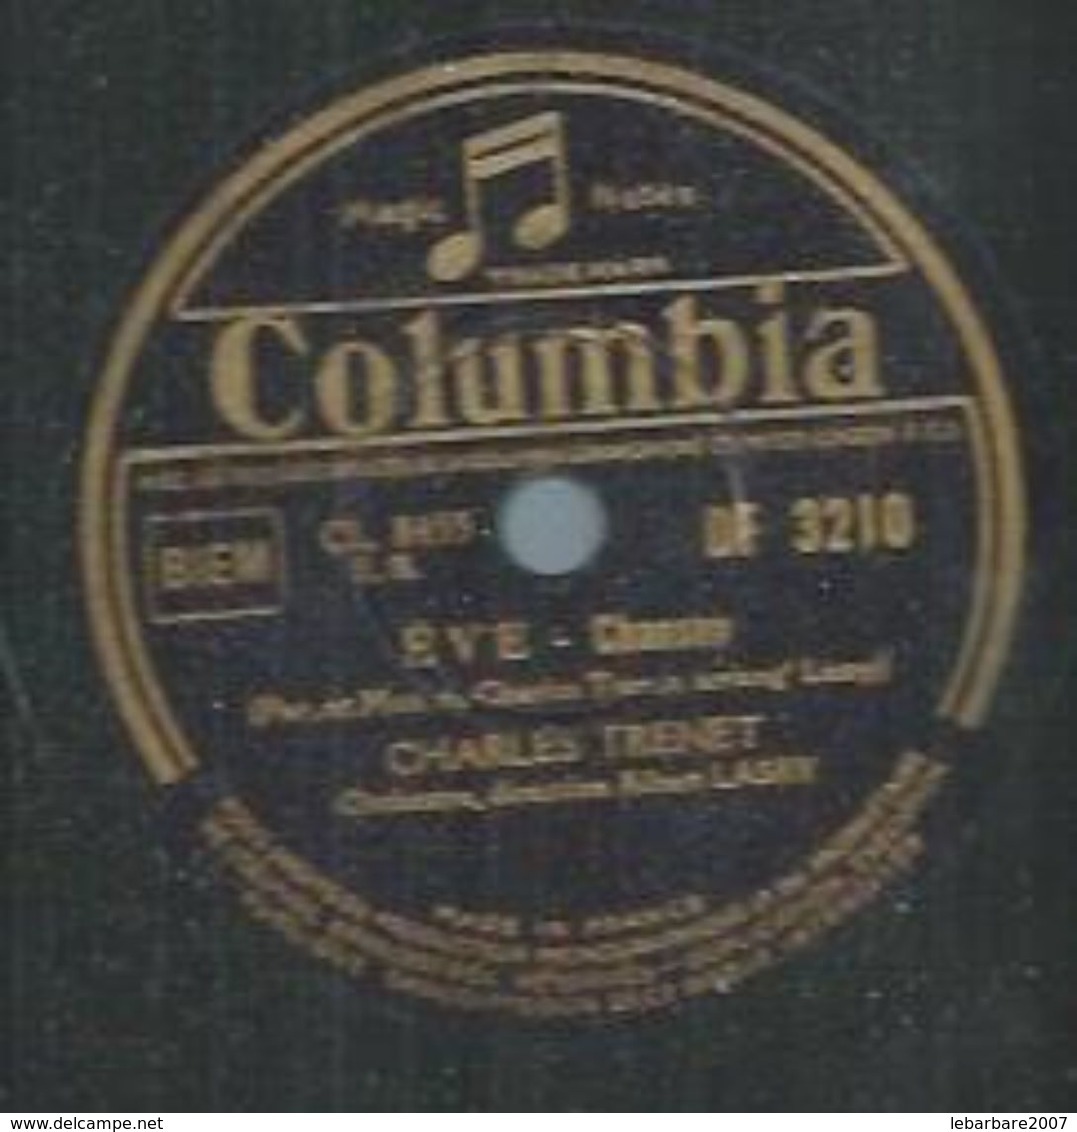 78 Tours - CHARLES TRENET  - COLUMBIA 3210  " EVE " + " COQUELICOT " - 78 T - Disques Pour Gramophone